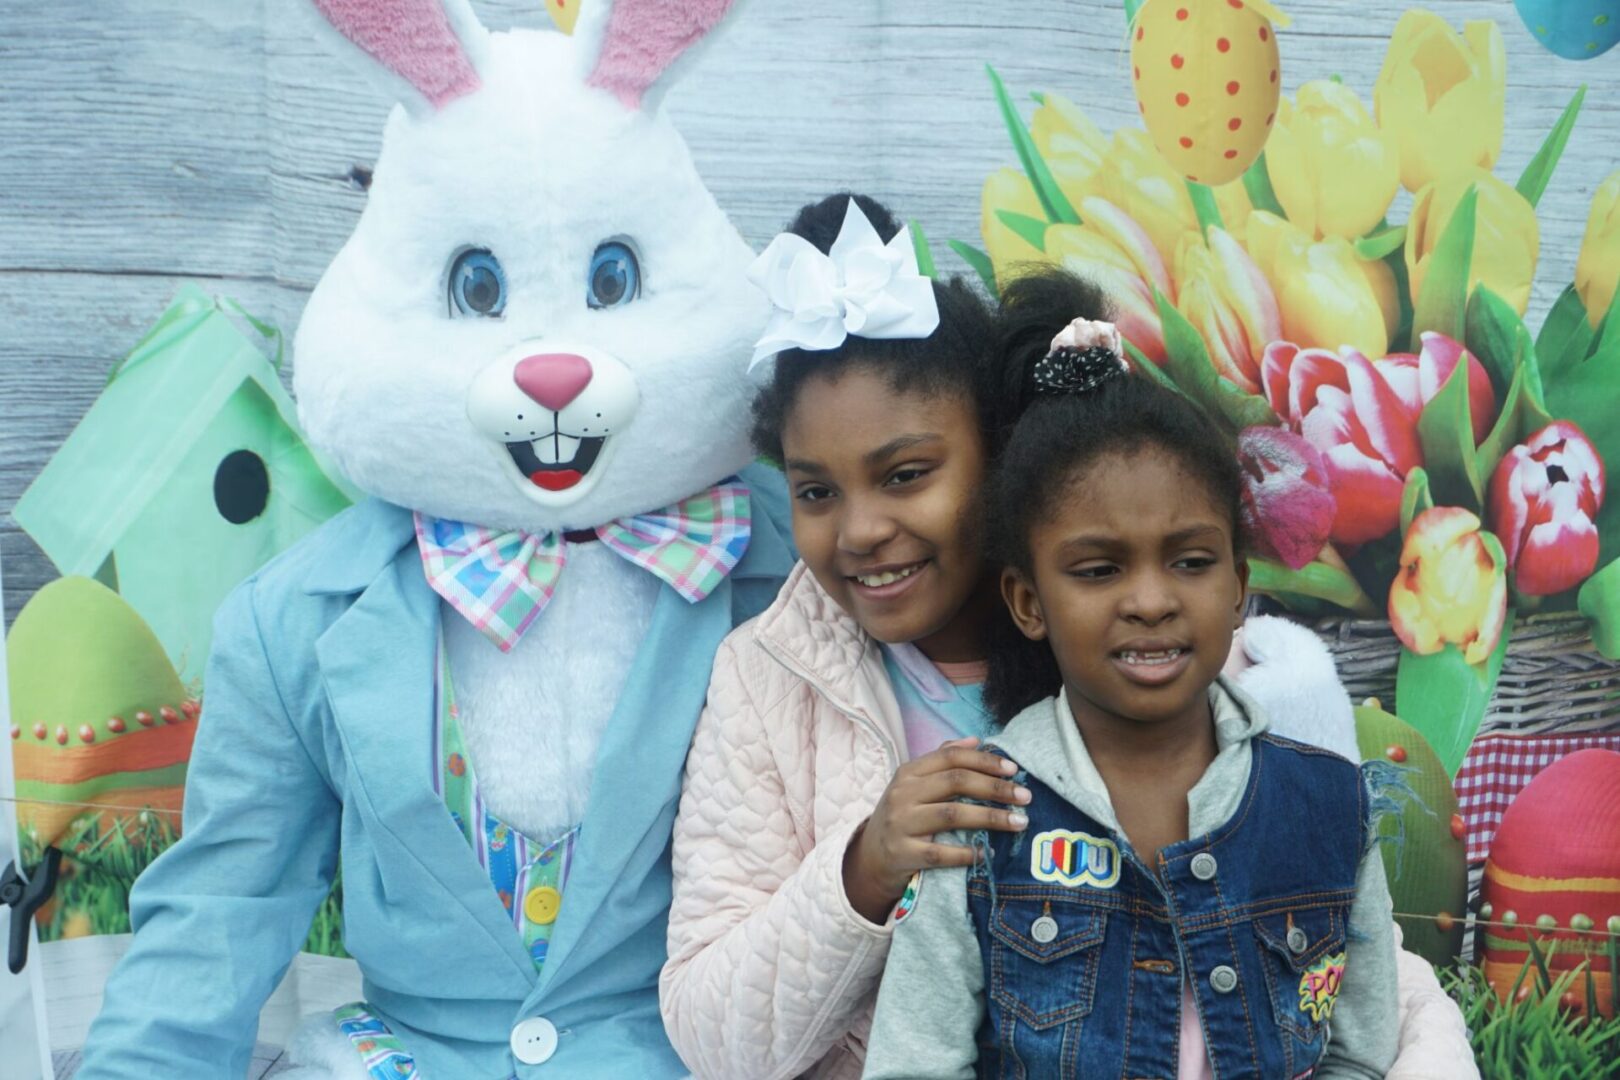 The bunny mascot and two girls with their hair tied on top